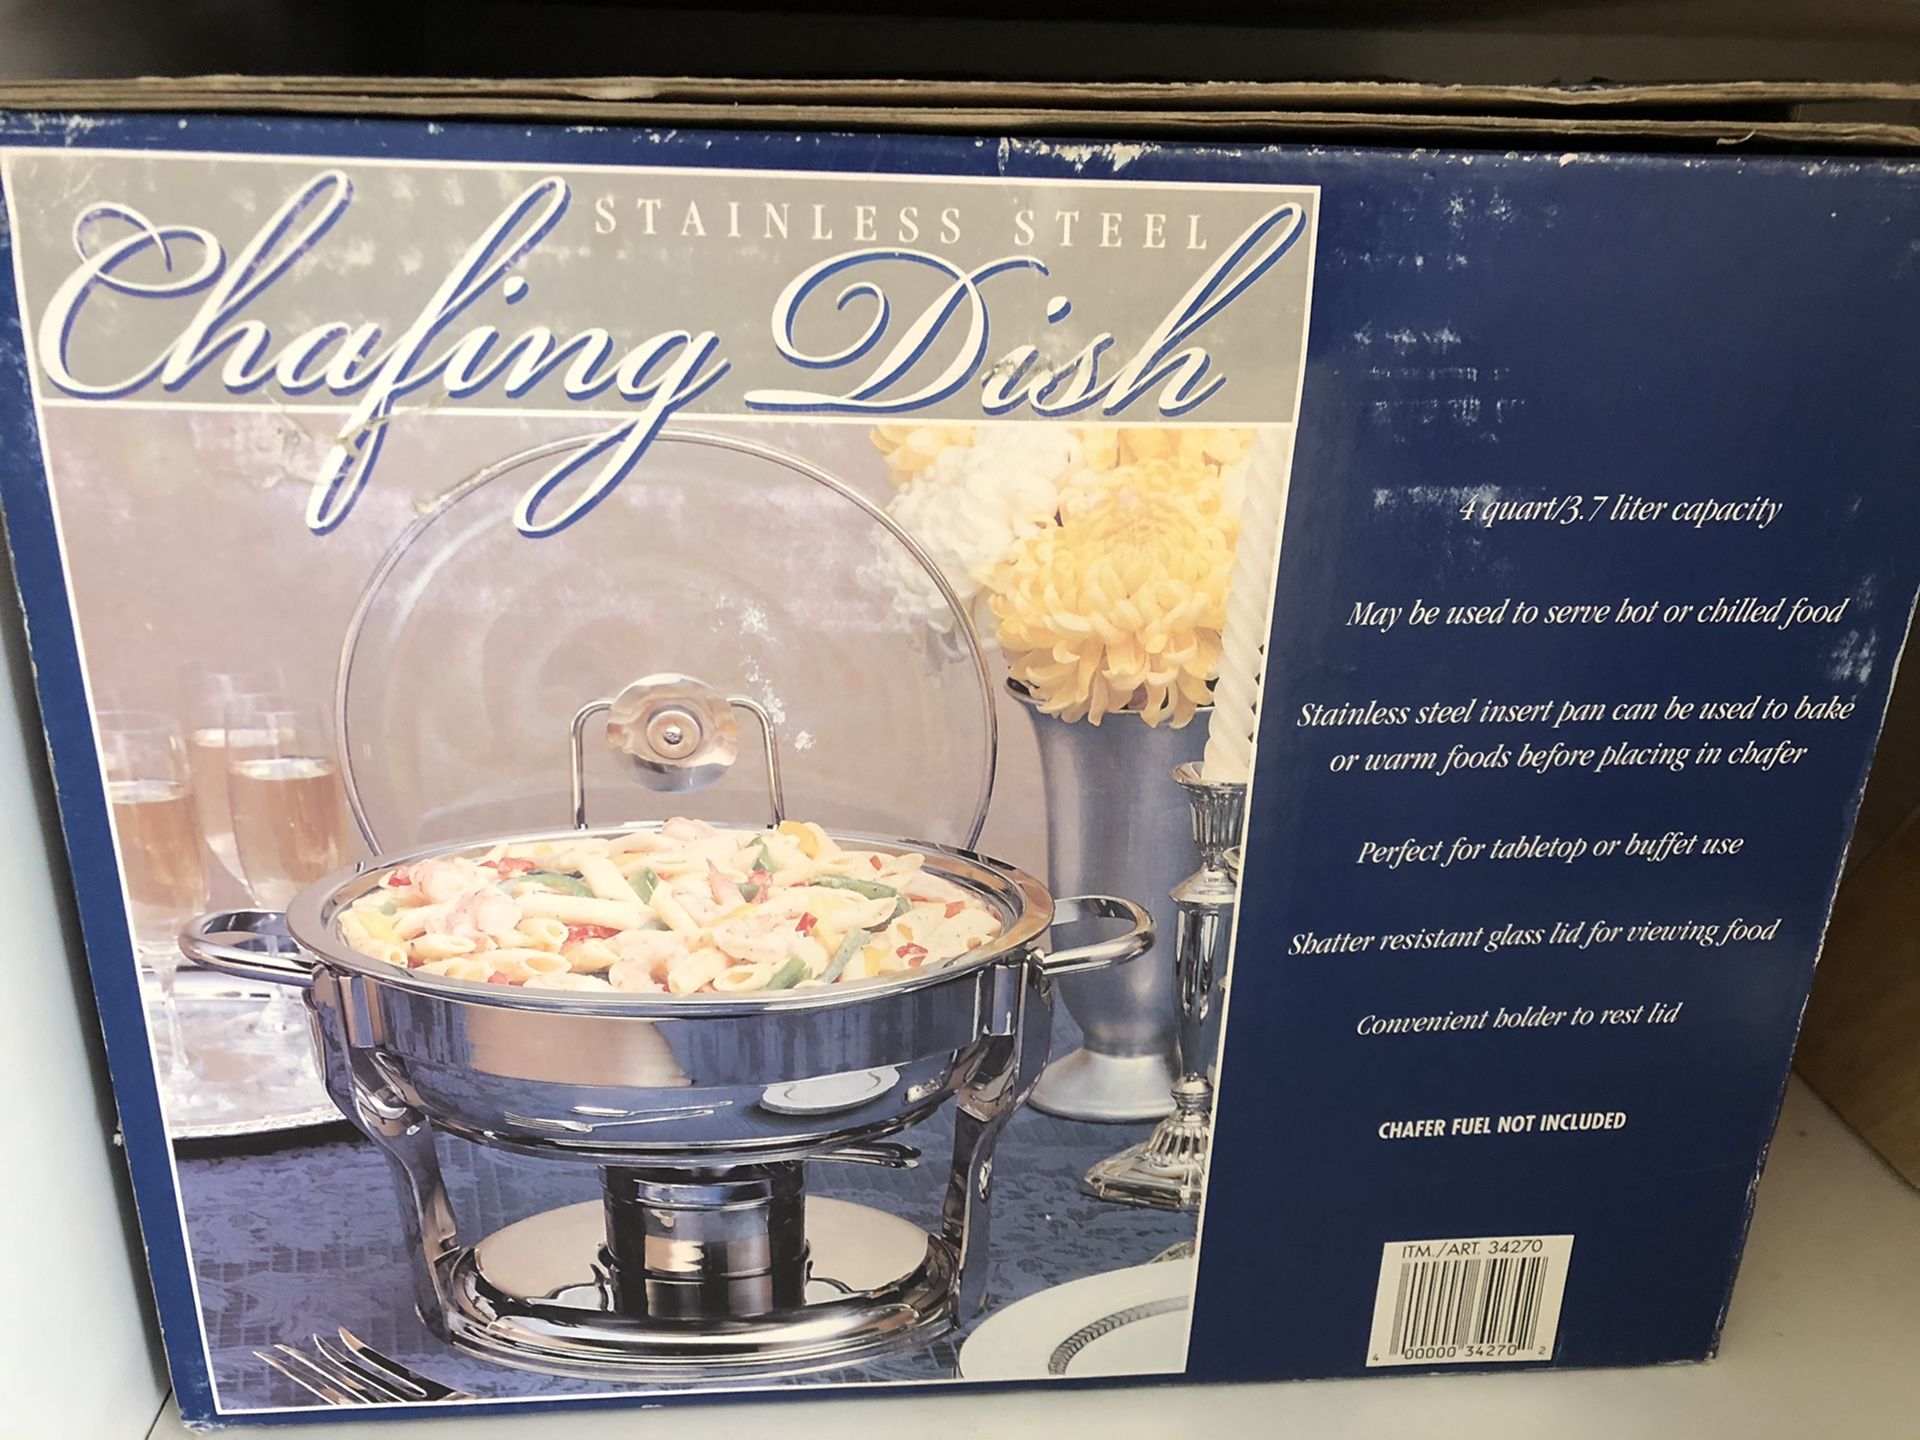 Chafing Dish - Brand New in Box